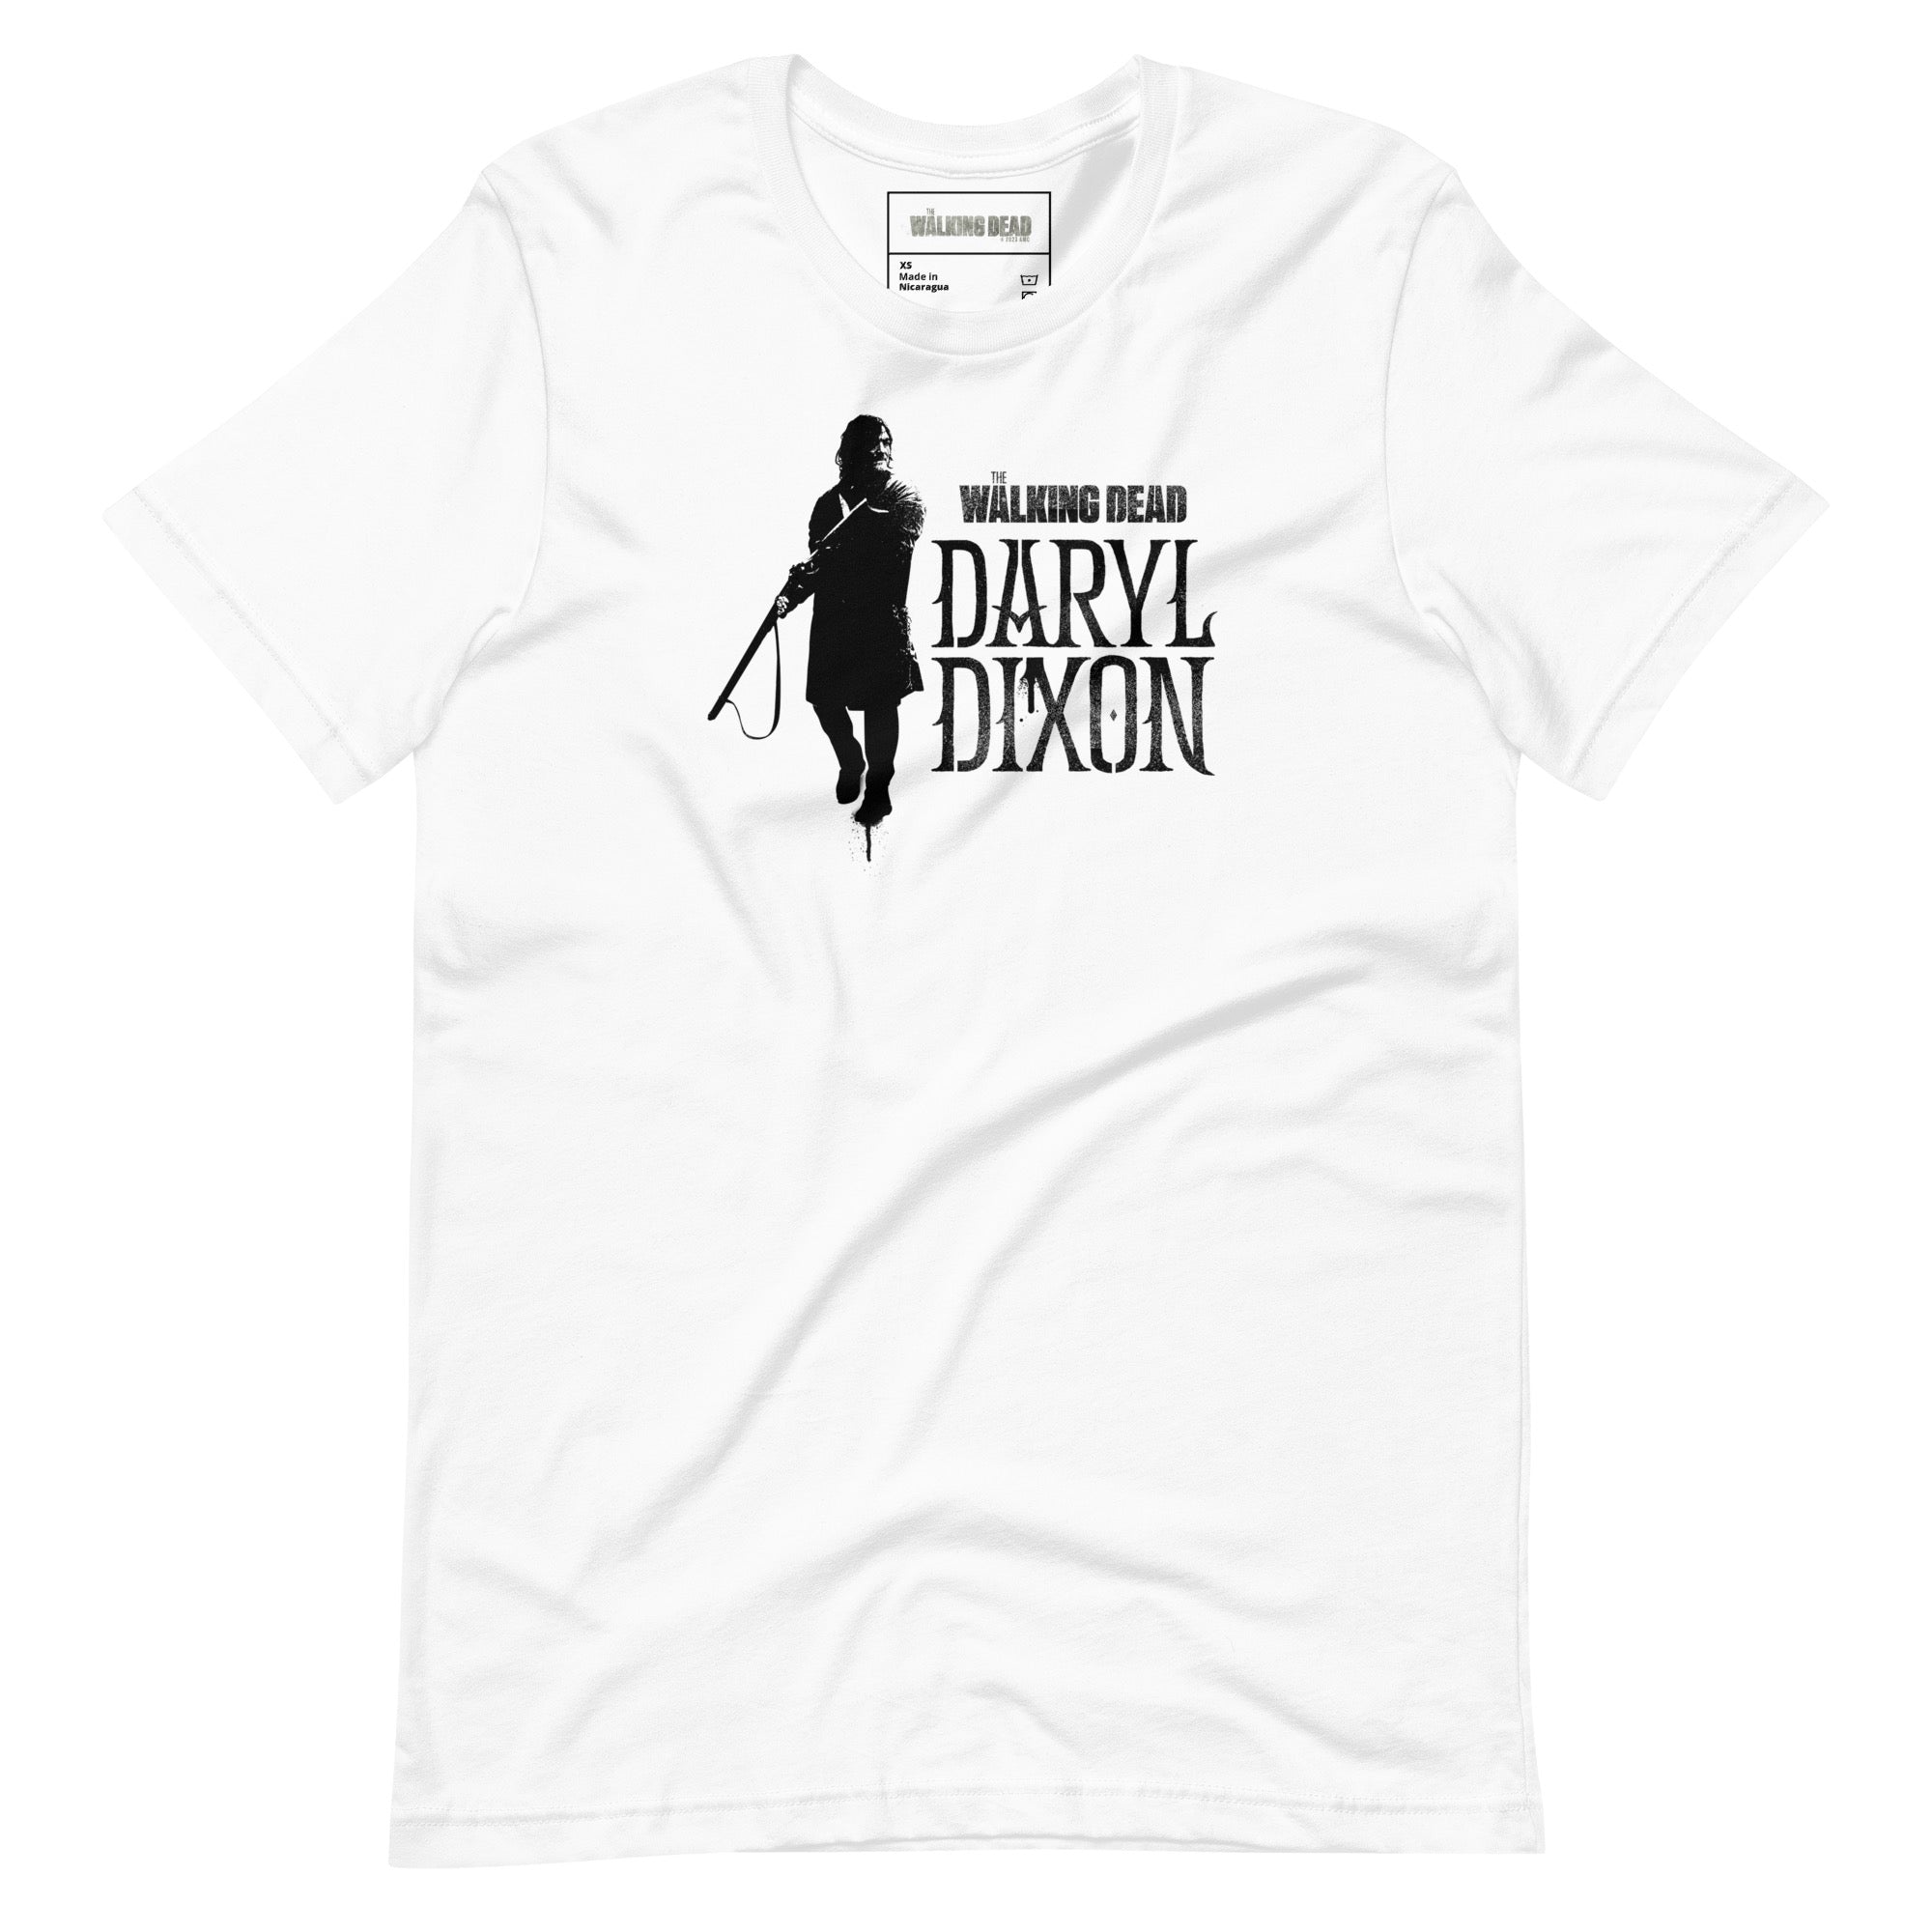  The Walking Dead Daryl Dixon In Dog We Trust T-Shirt :  Clothing, Shoes & Jewelry